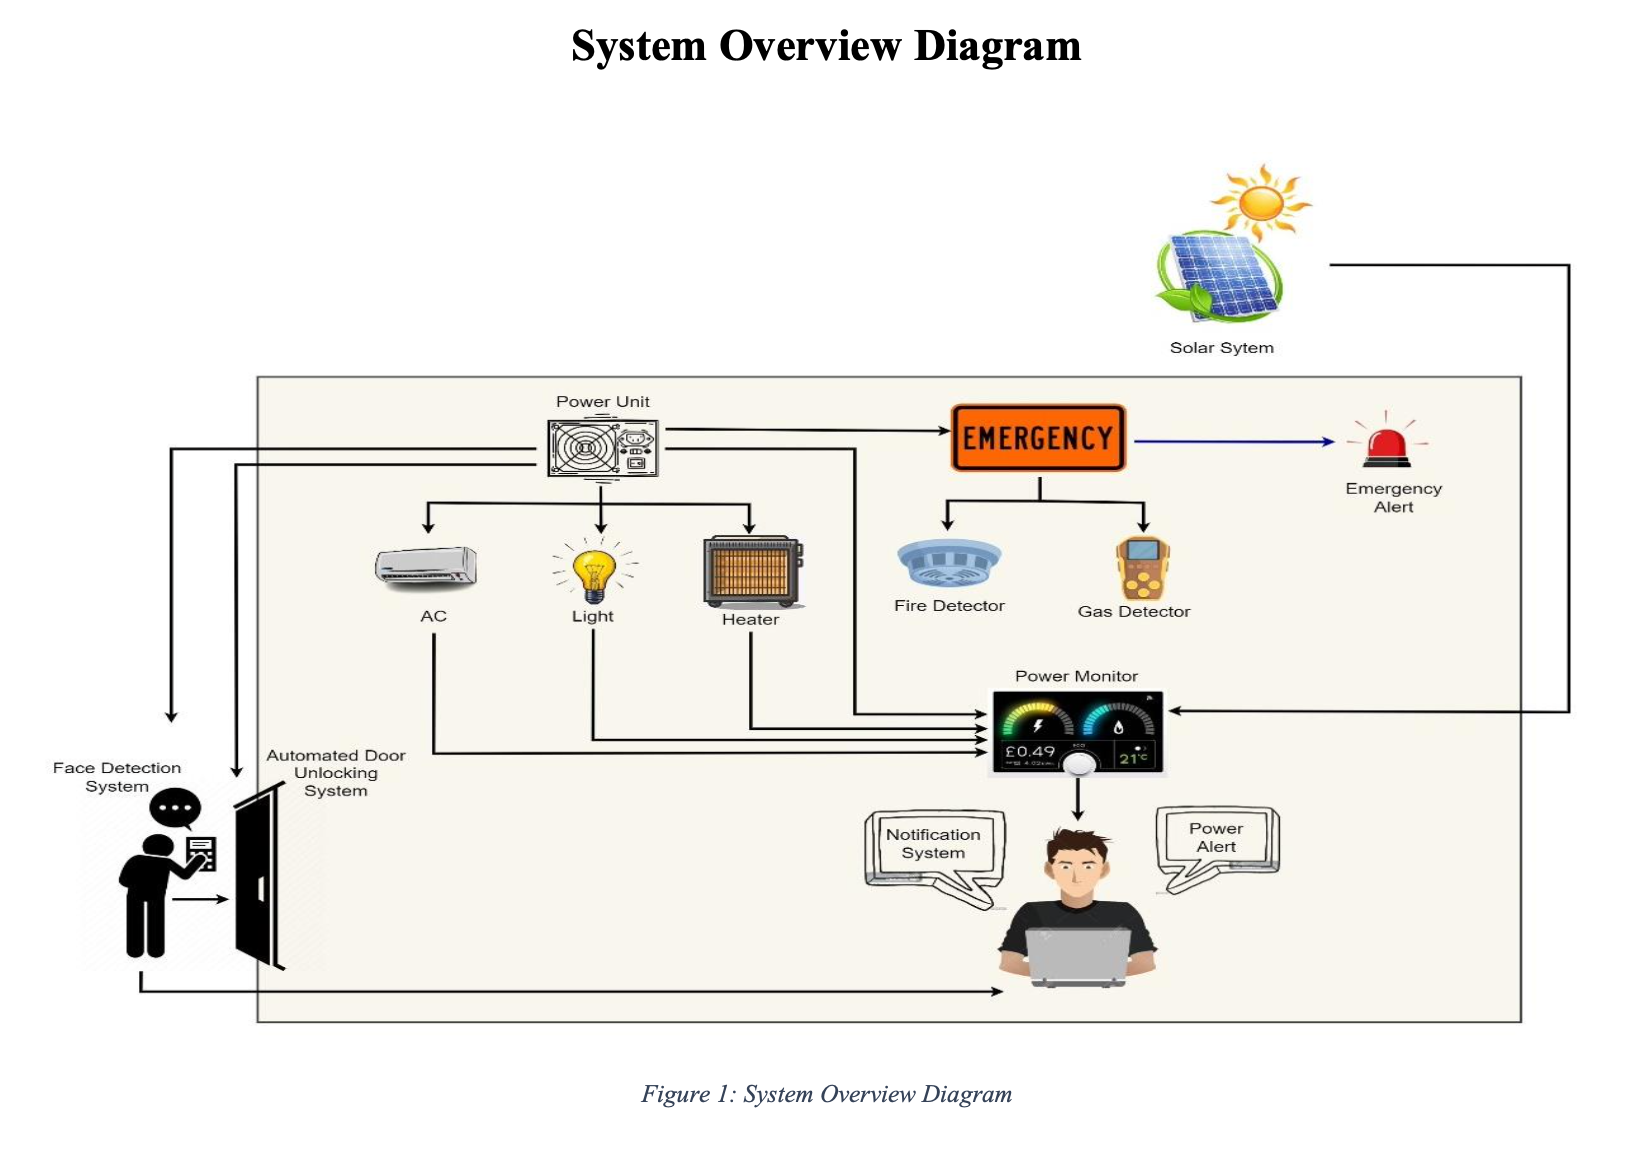 System Overview Diagram.png